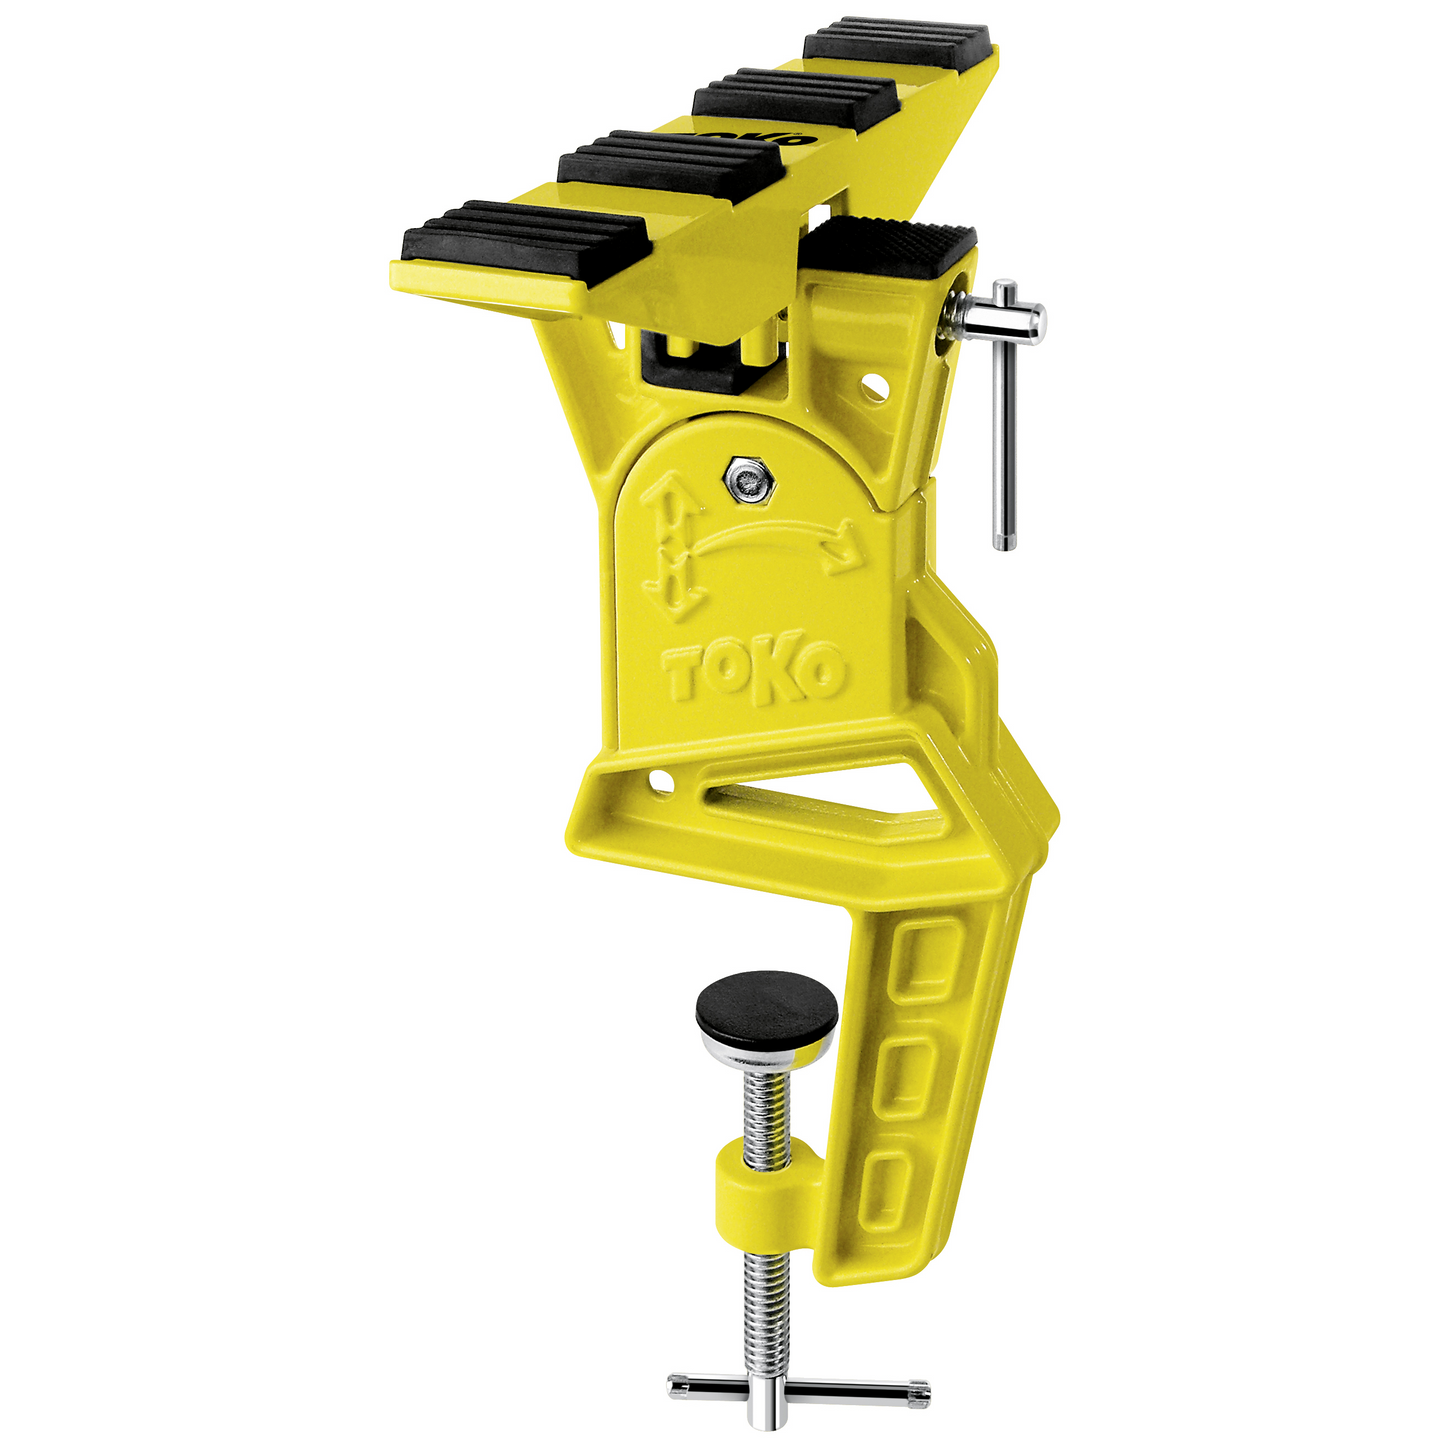 A product picture of the Toko Universal Adapter for Ski Vise World Cup